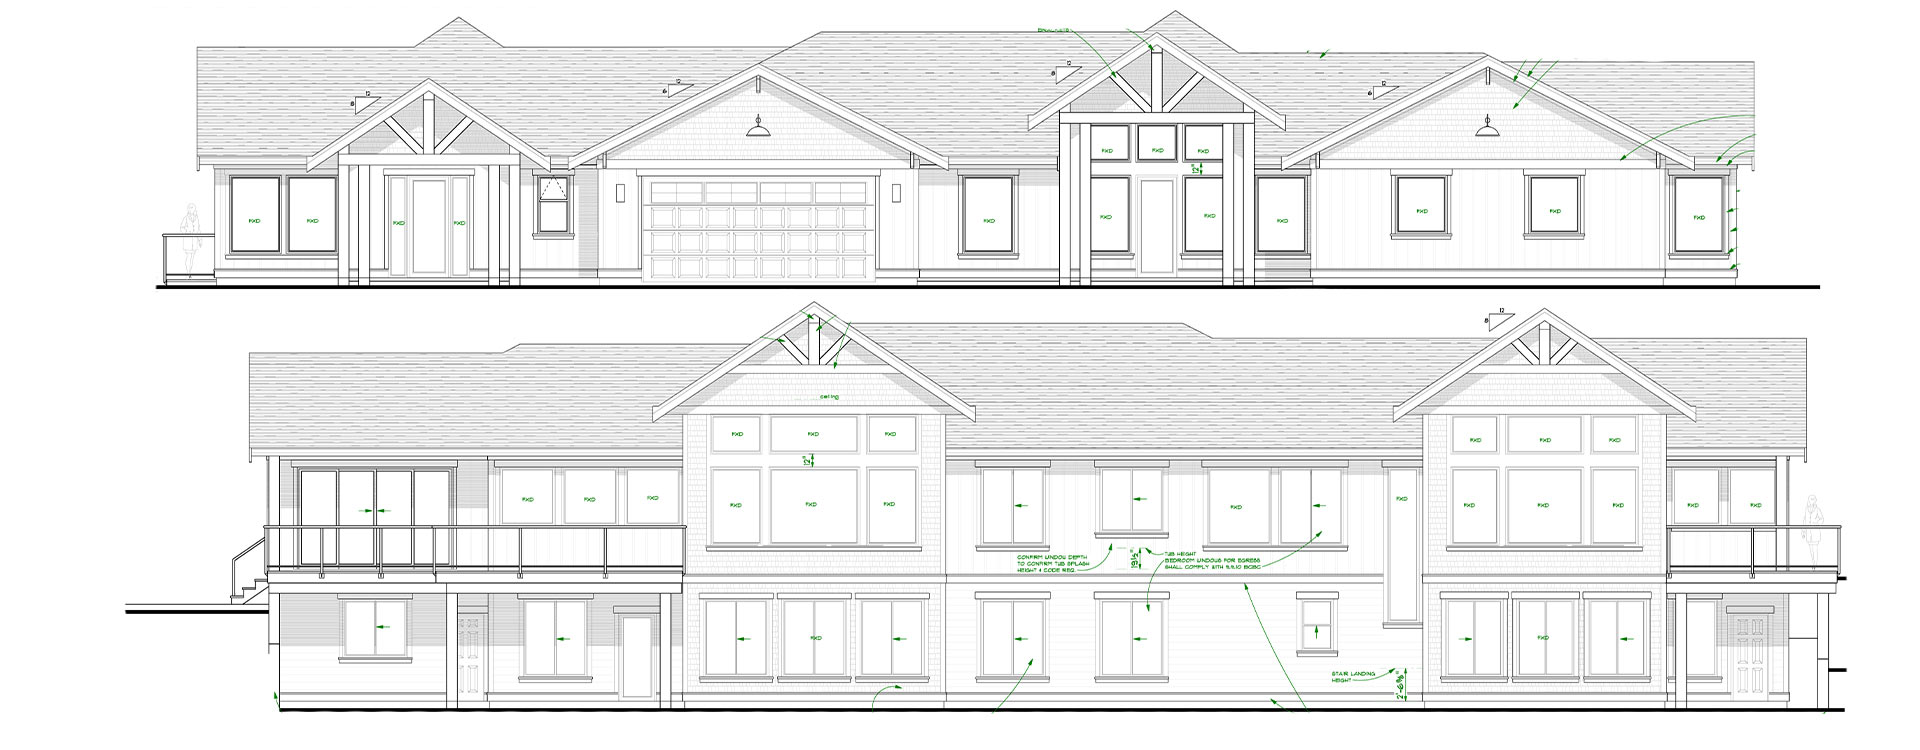 Exterior concept drawings for custom home